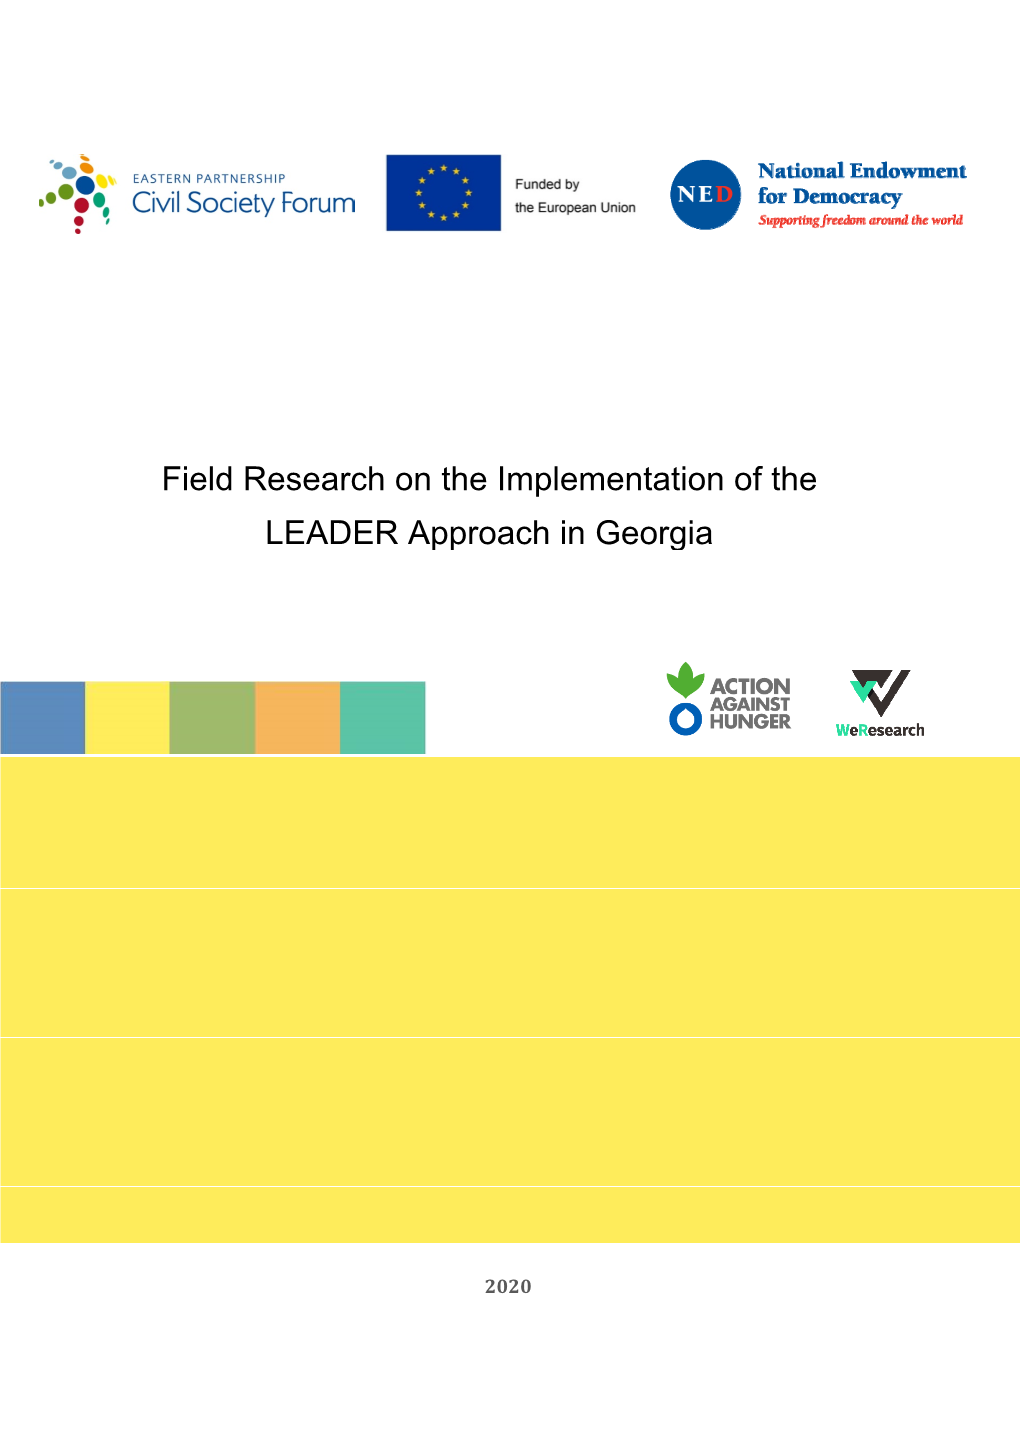 Field Research on the Implementation of the LEADER Approach in Georgia